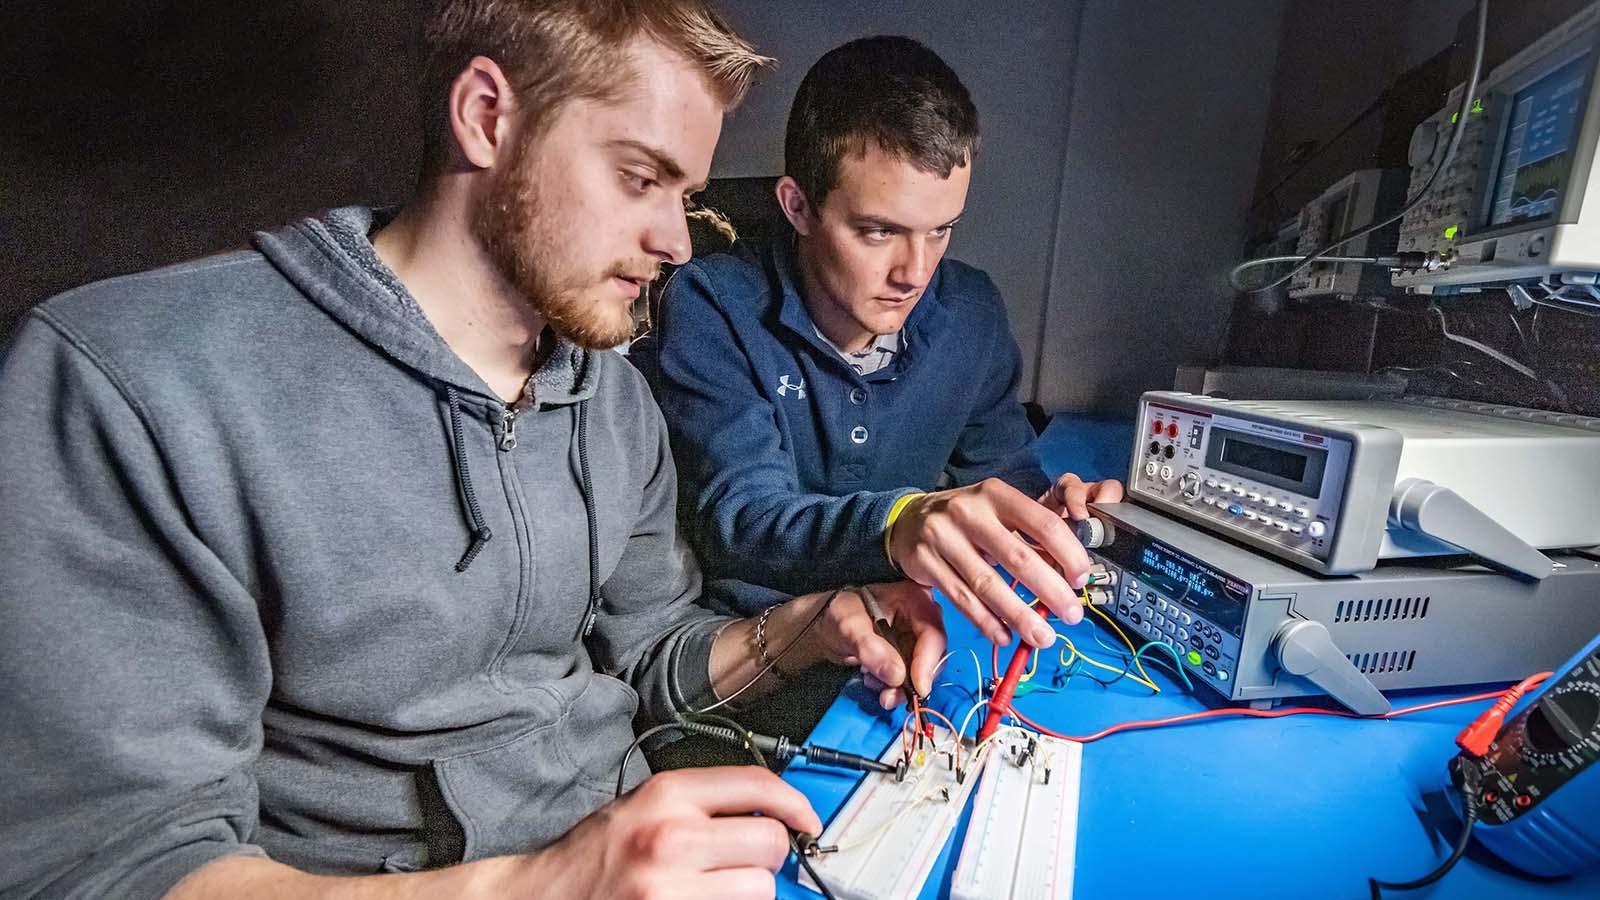 Two electrical engineering students working on project